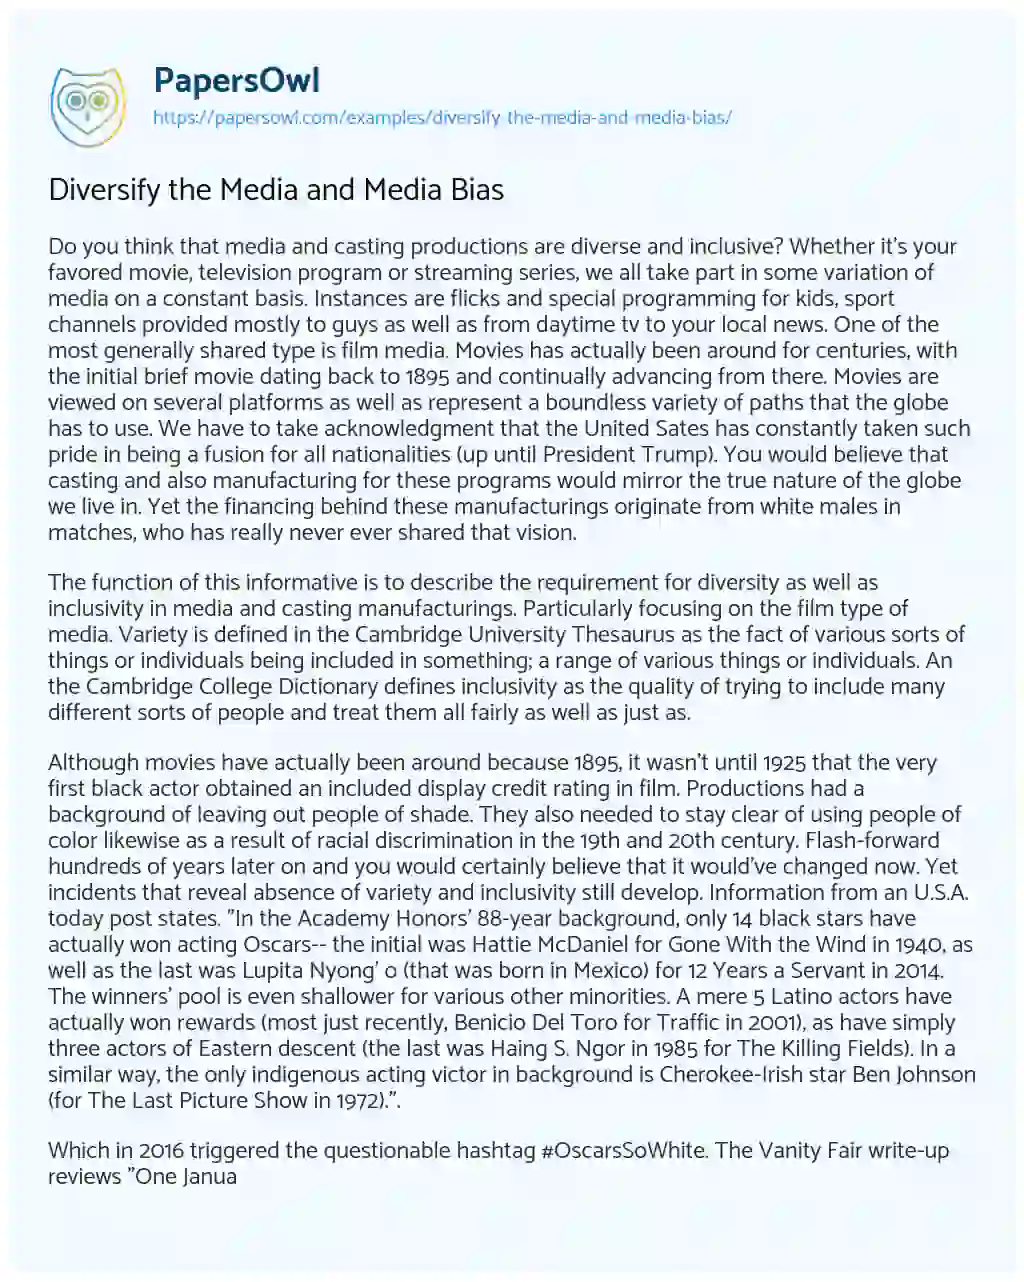 Essay on Diversify the Media and Media Bias